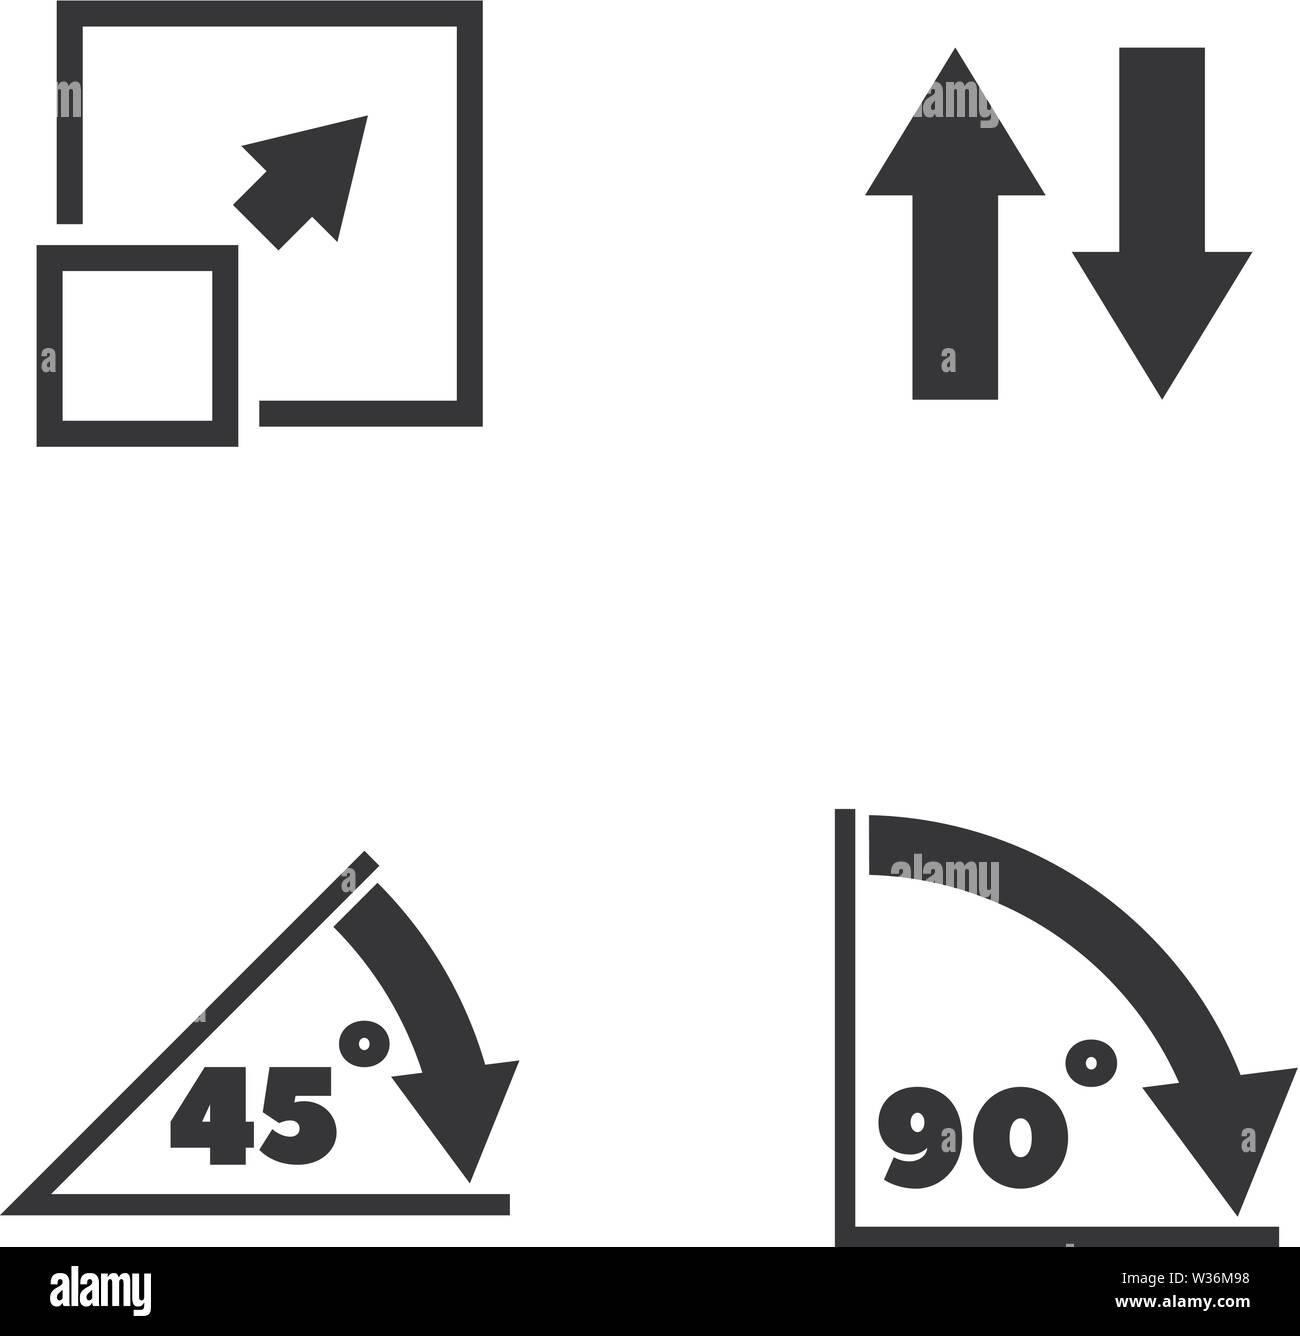 Rotate Element Square And Arrow 45 Degree Angle Vector Image